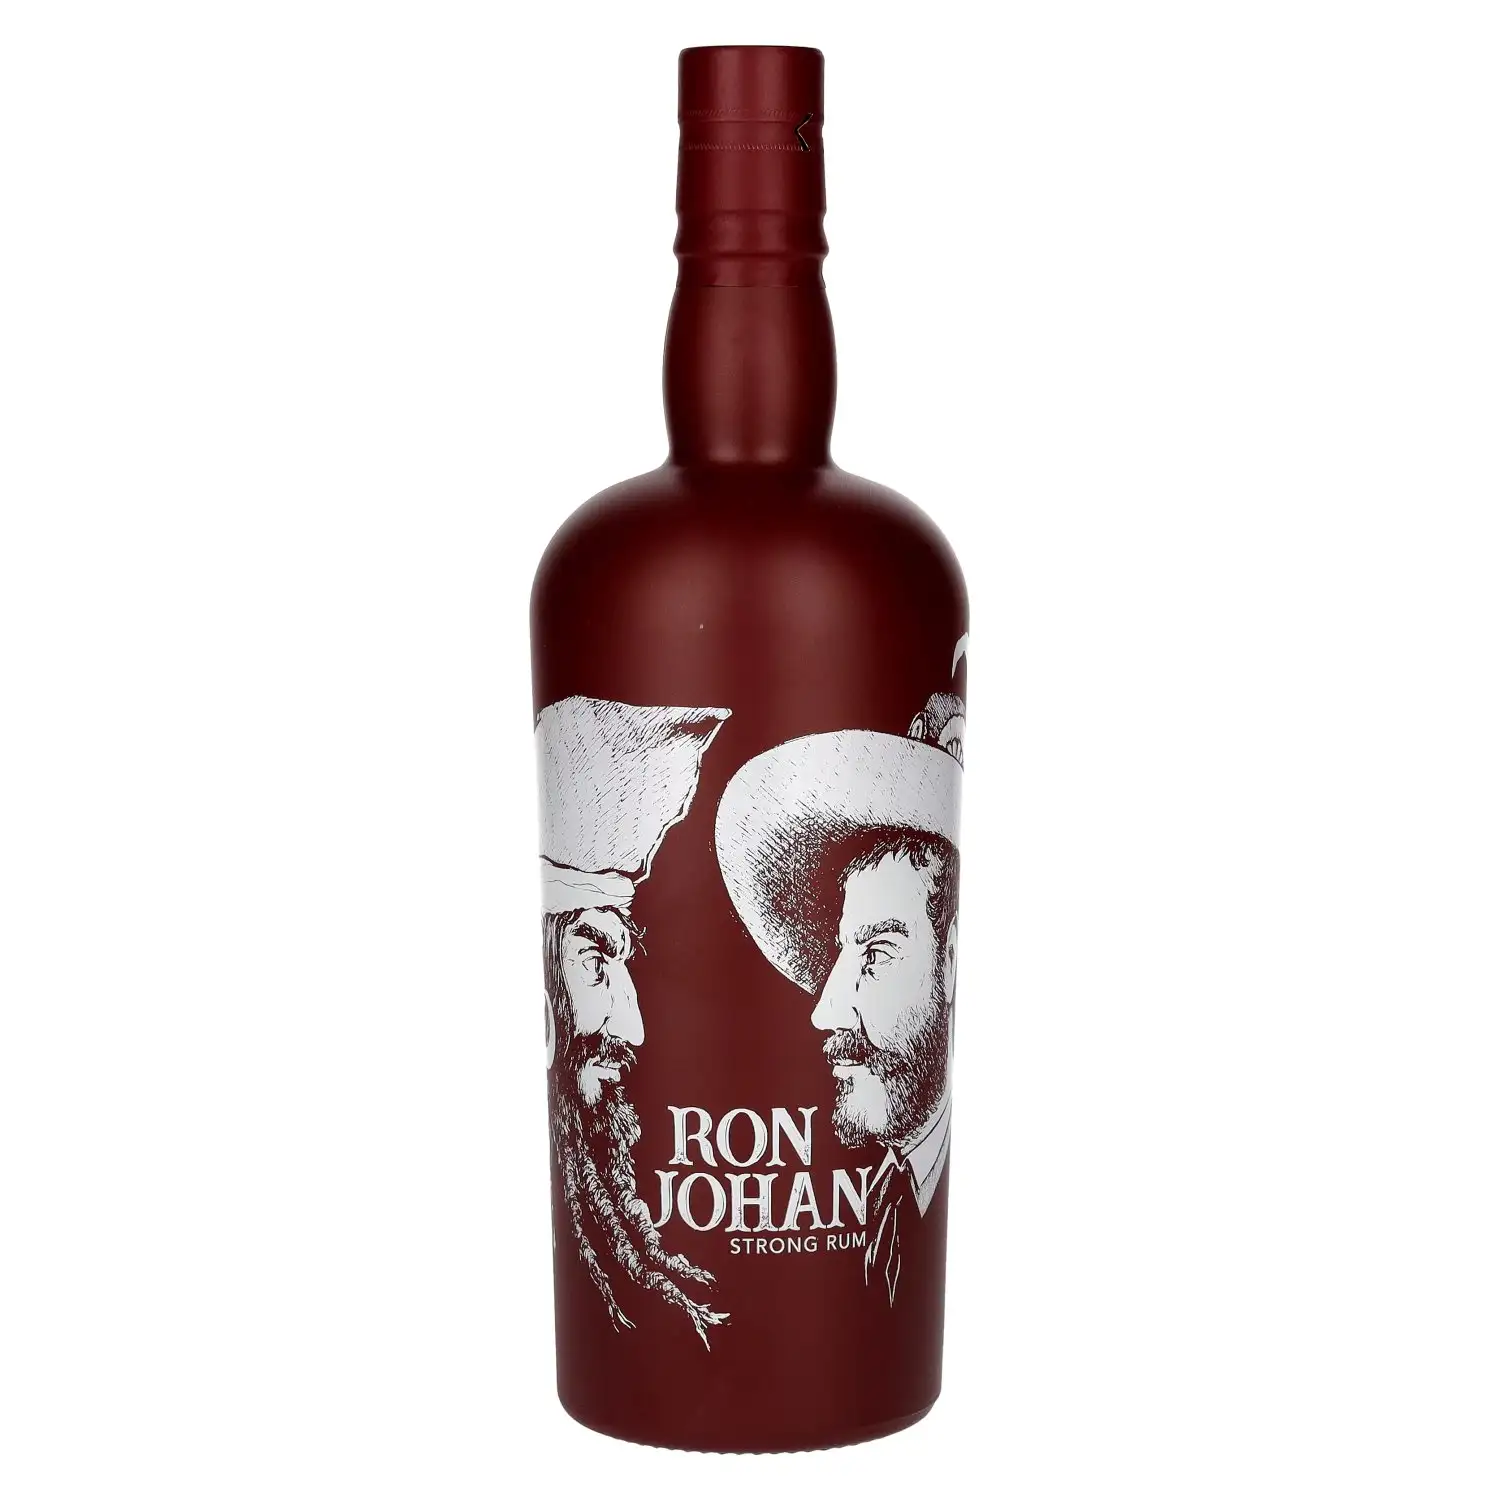 Image of the front of the bottle of the rum Ron Johan Strong Rum